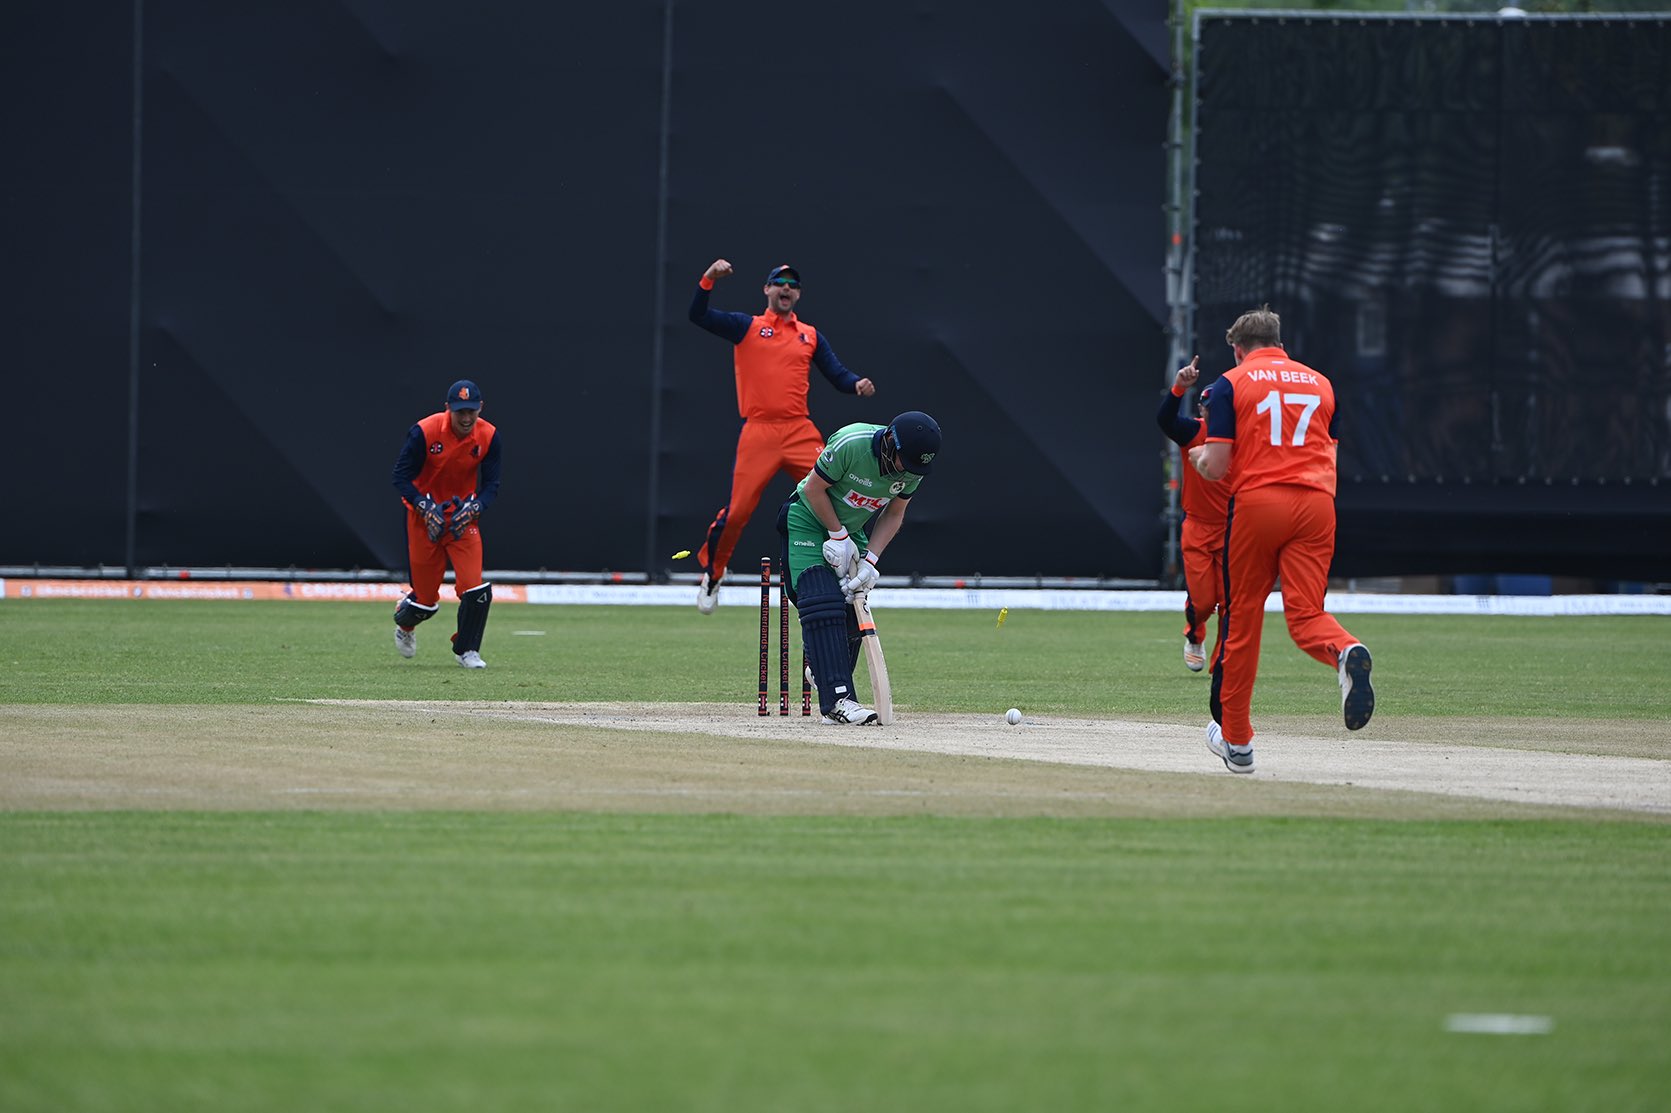 T20 World Cup 2021 | Netherlands cricket is here and we want to go up against the big boys, says coach Ryan Campbell